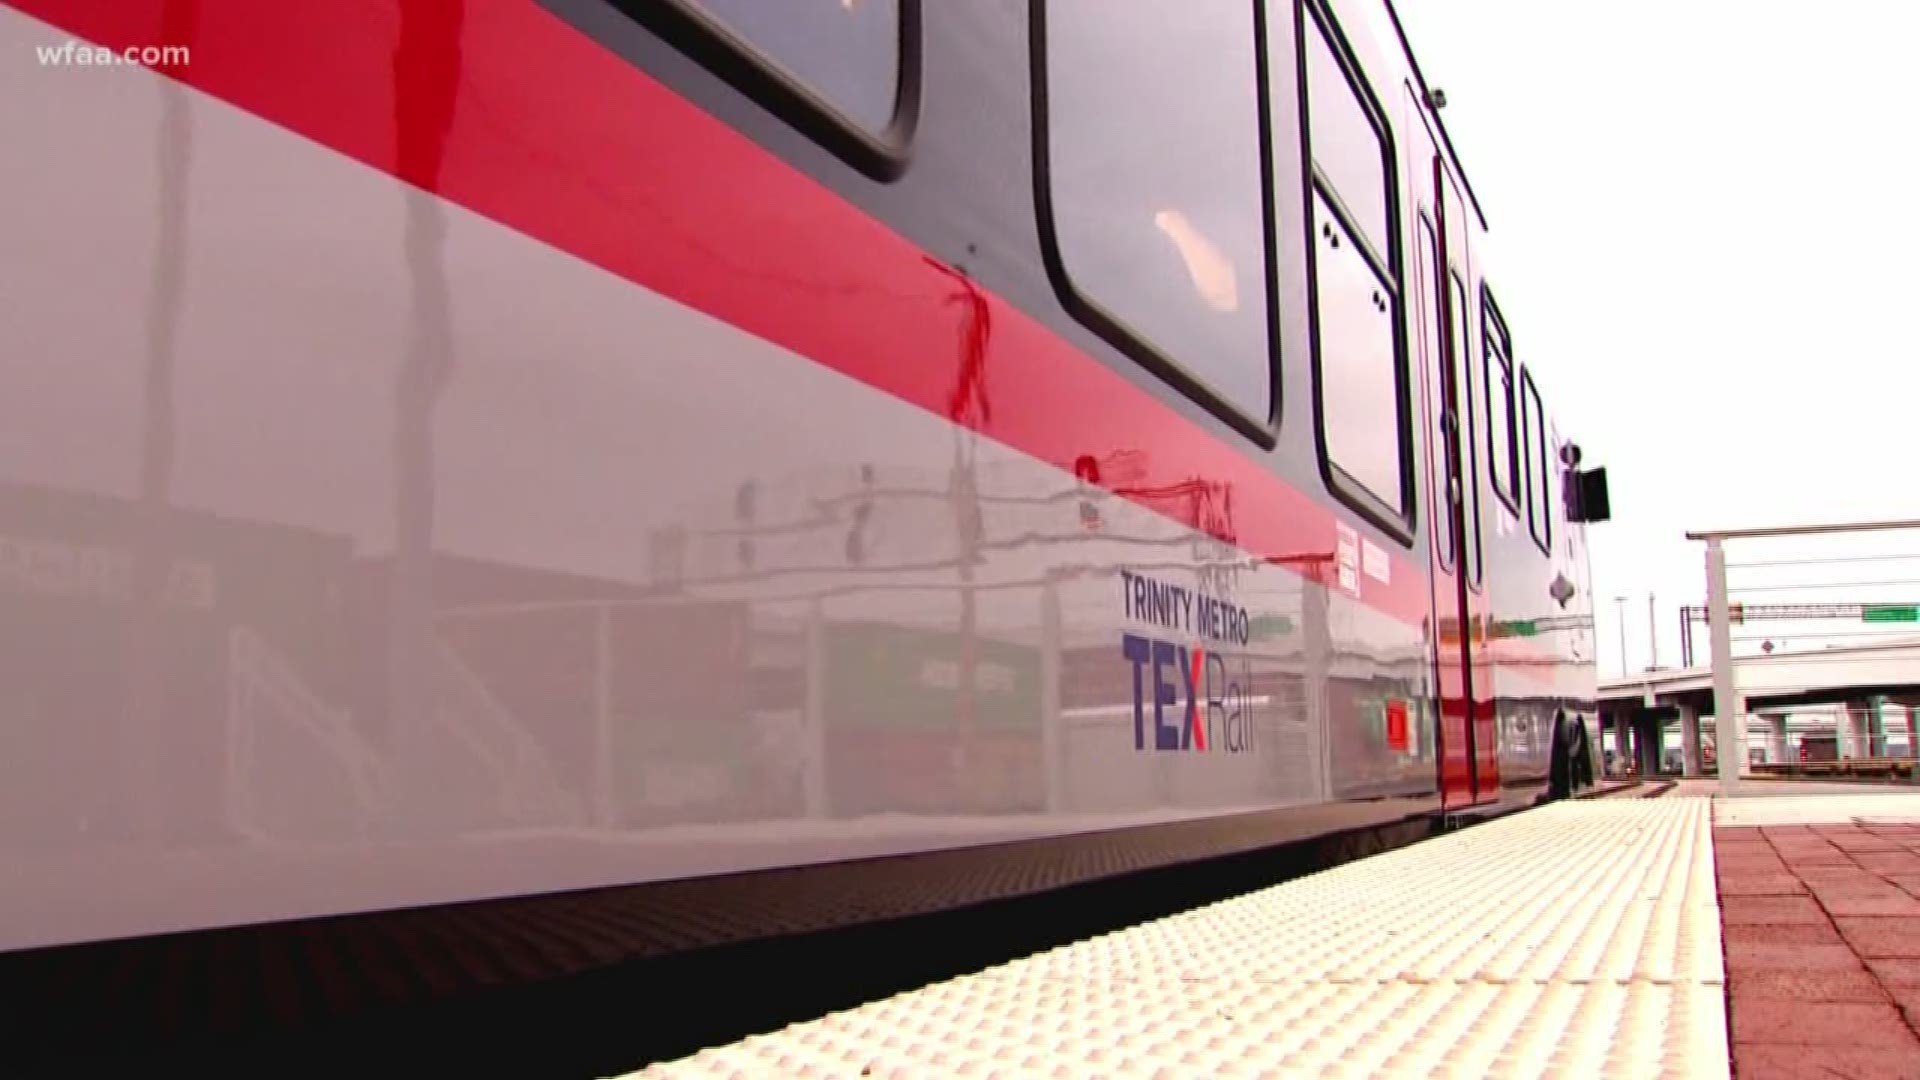 The new Tarrant County rail saw 100,000 passengers in its first month.